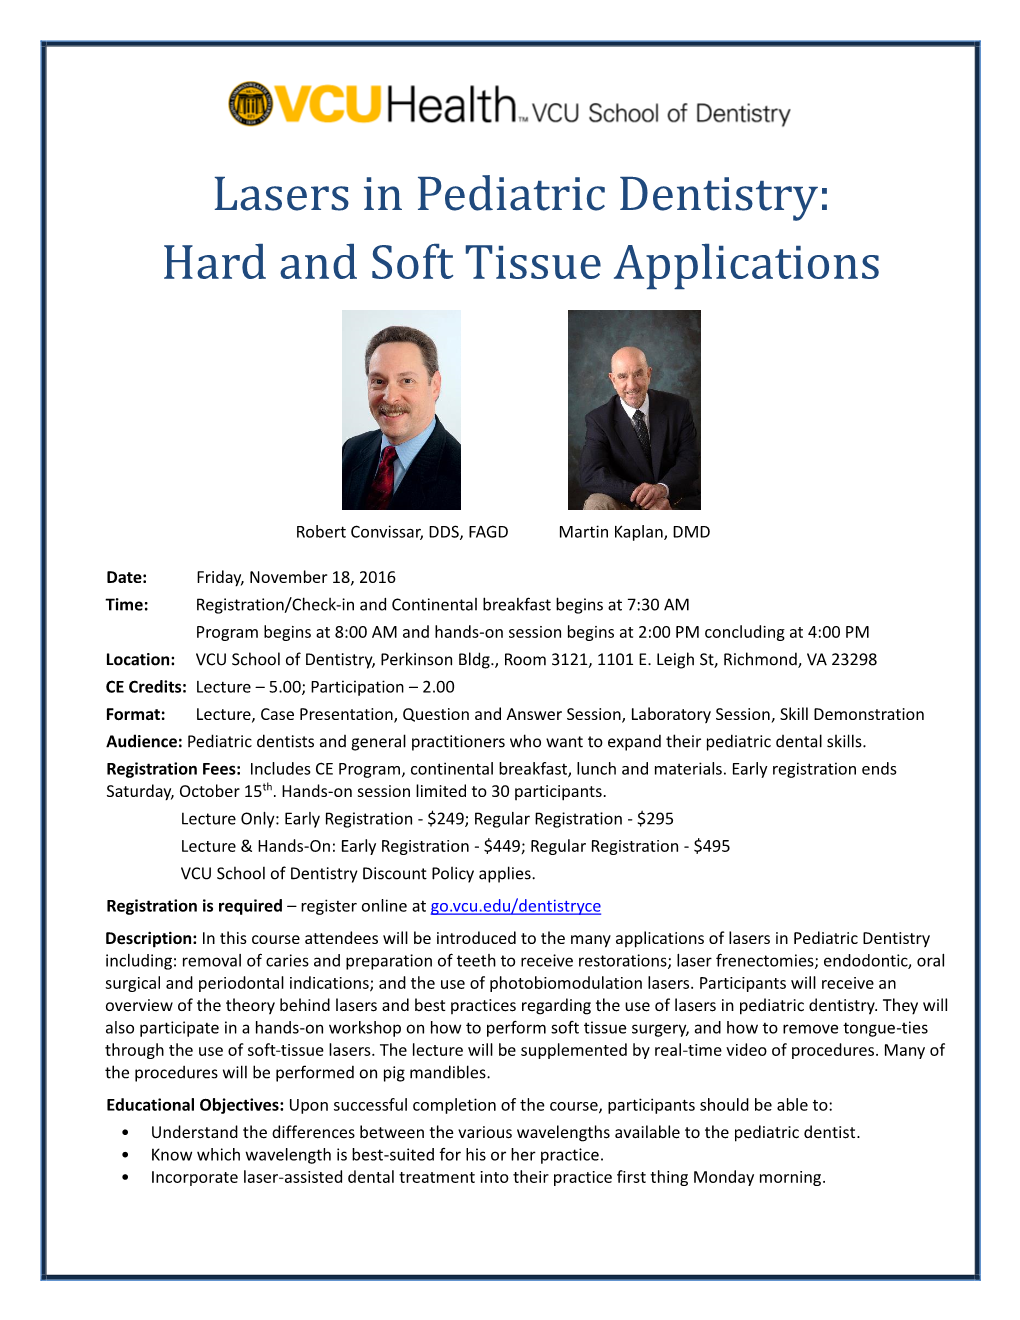 Lasers in Pediatric Dentistry: Hard and Soft Tissue Applications